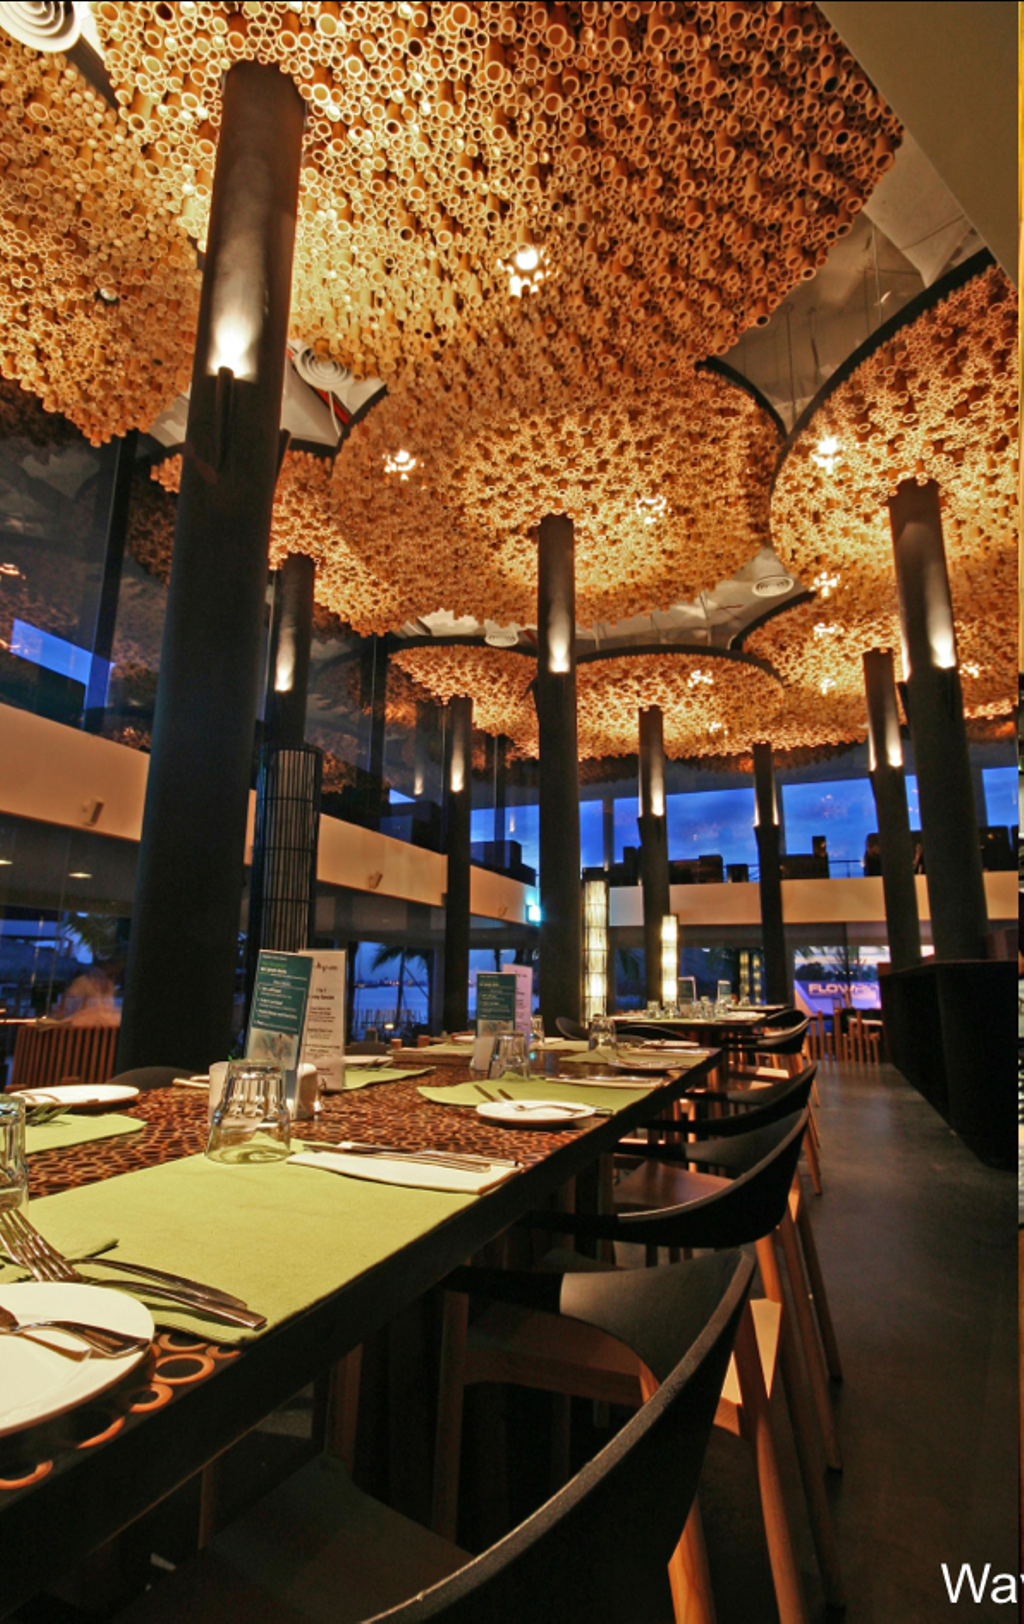 Wavehouse Sentosa, Commercial, Architect, EZRA Architects, Contemporary, Wooden Chair, Wooden Chairs, Wooden Flooring, False Ceiling, High Ceiling, Restaurant